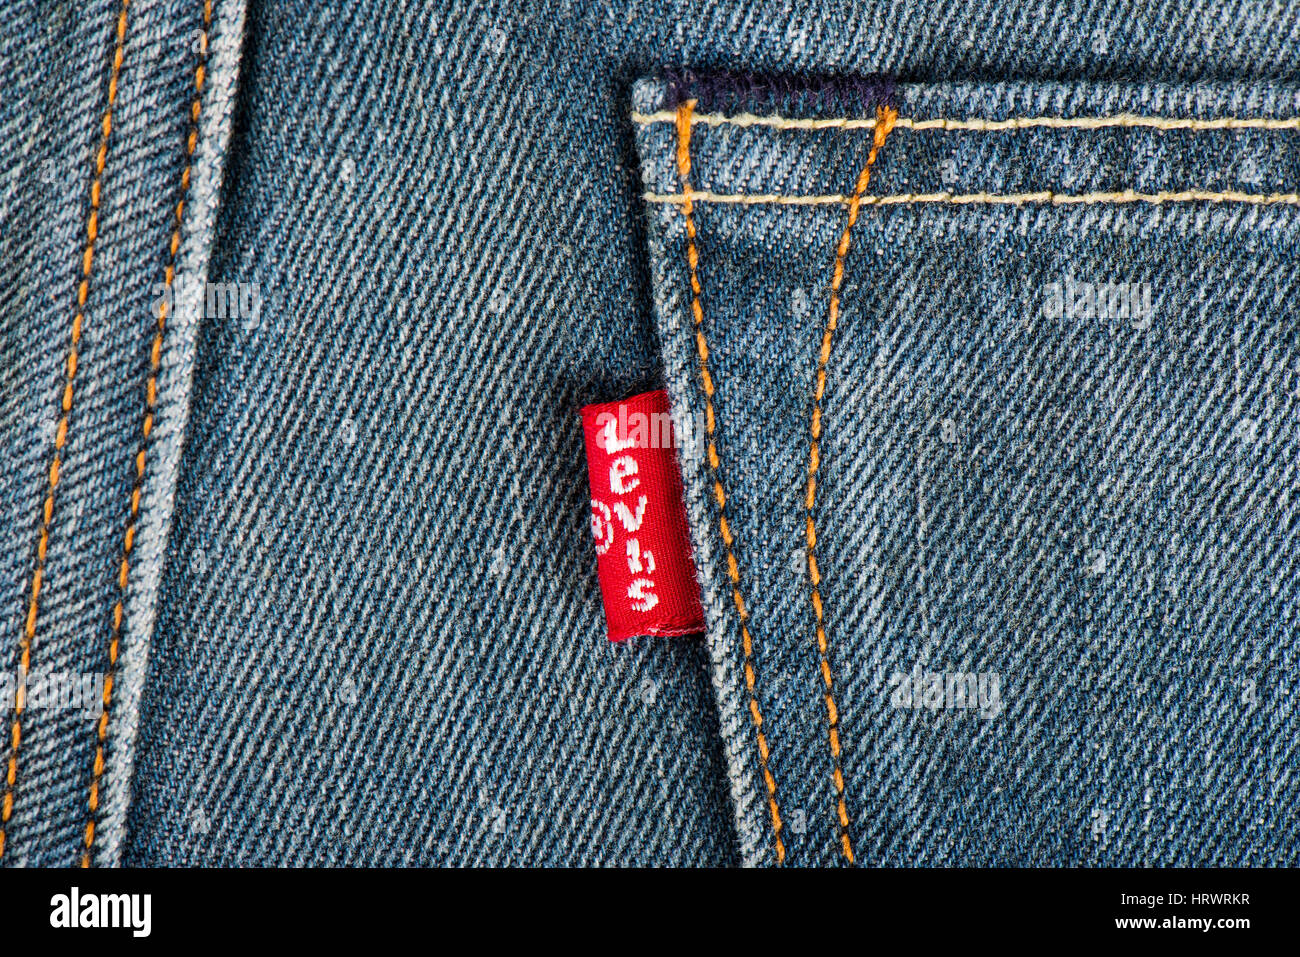 BANGKOK, THAILAND - DECEMBER 09 2014: Close up of the LEVI'S red label on the back pocket of denim jeans. LEVI'S is a brand name of Levi Strauss and Co, founded in 1853. Stock Photo